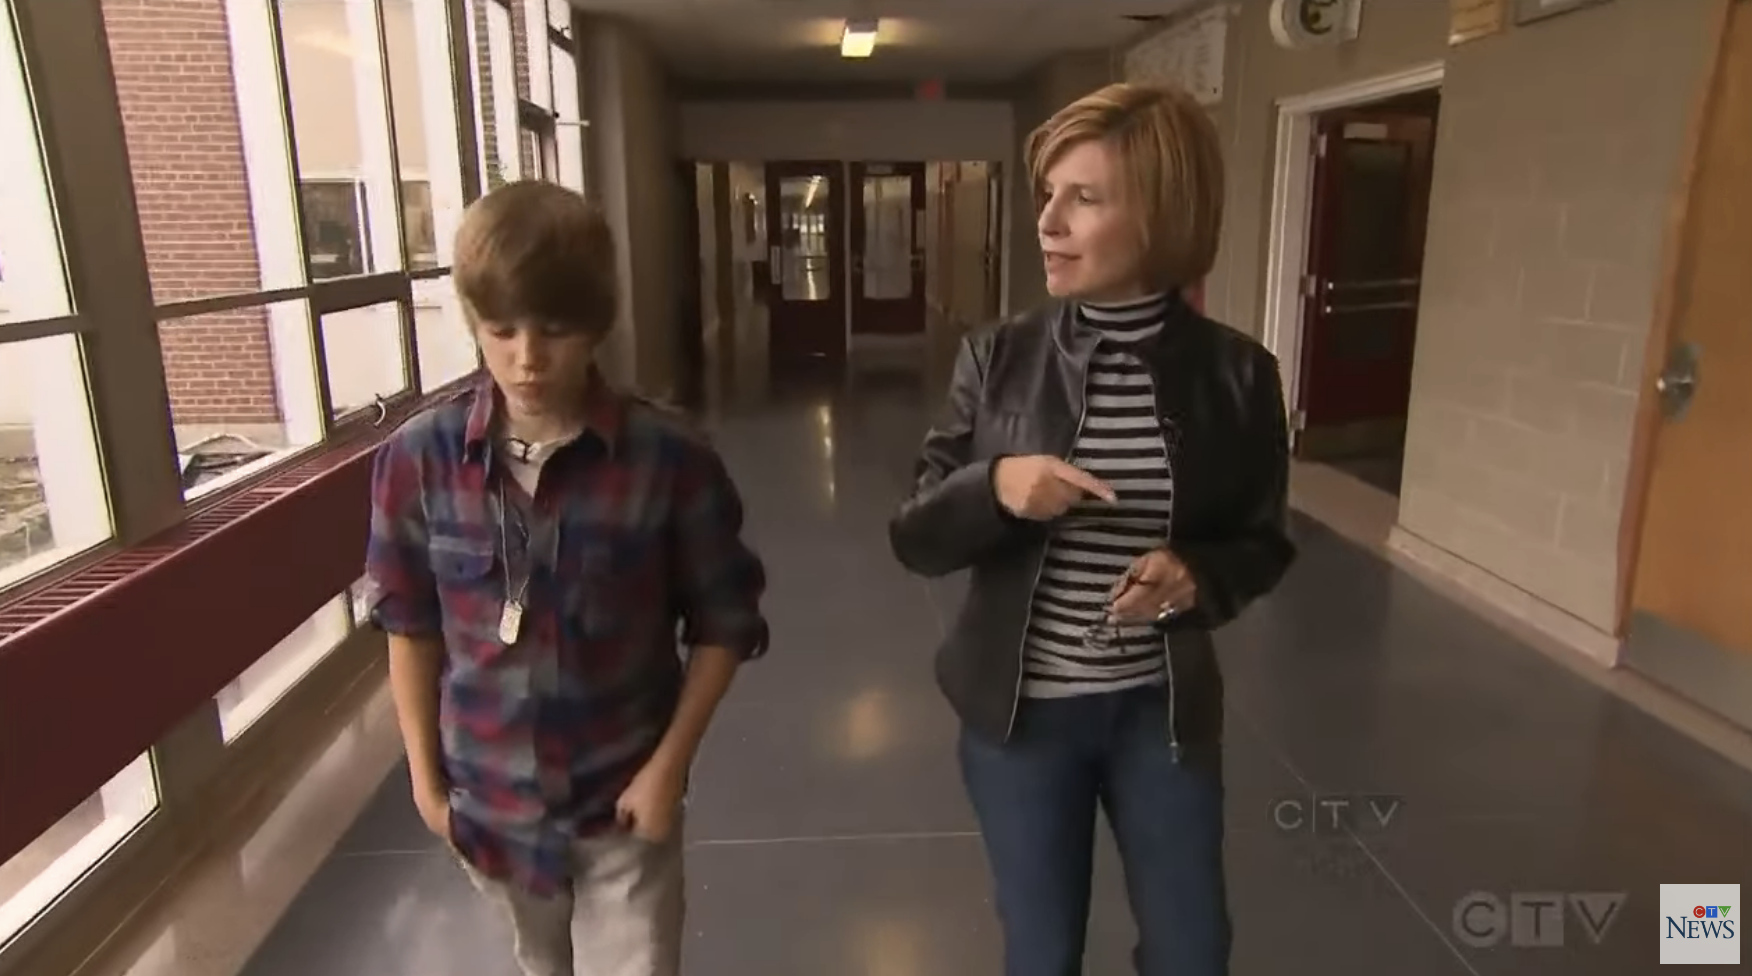 Close-up of Justin walking down a hallway with an interviewer